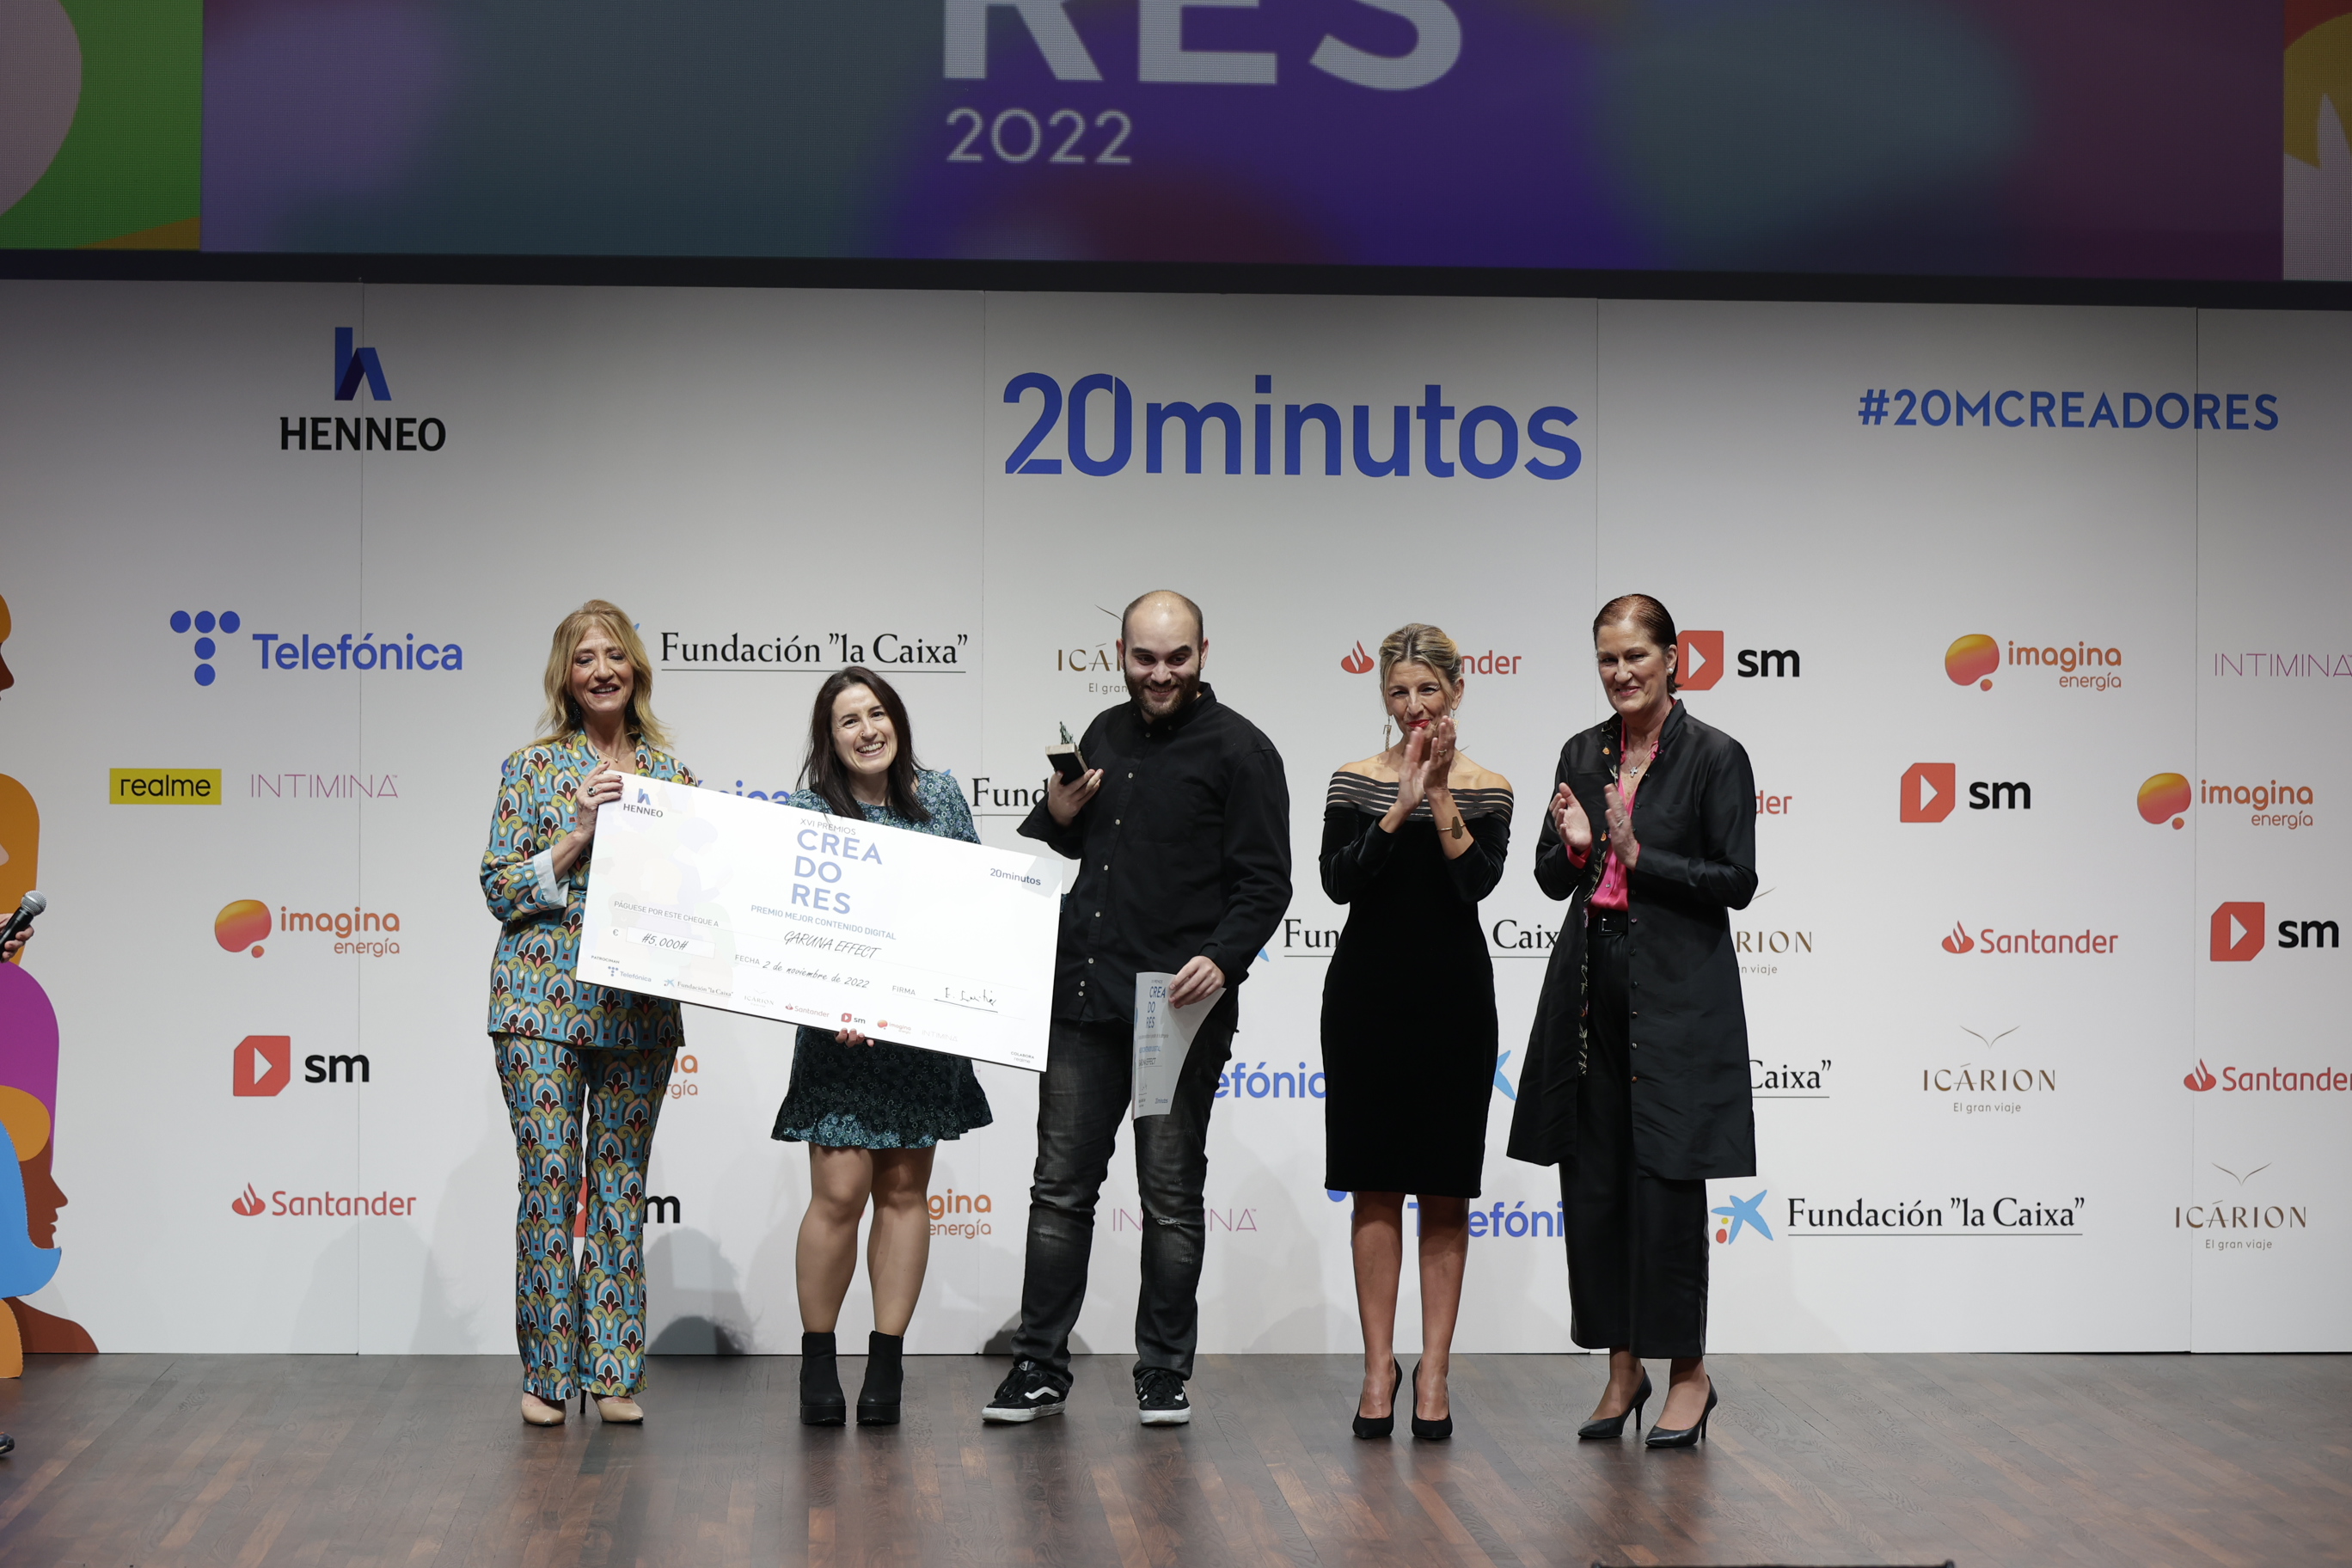 The director of '20minutos' (l), Encarna Samitier, the Minister of Labor, Yolanda Díaz, and the general director of Henneo Media (r), Laura Múgica, pose with the winners of the 2022 Creators Award (the most important in the contest), Rubén Sierra and Arima Rodríguez, for their project Garuna Effect.